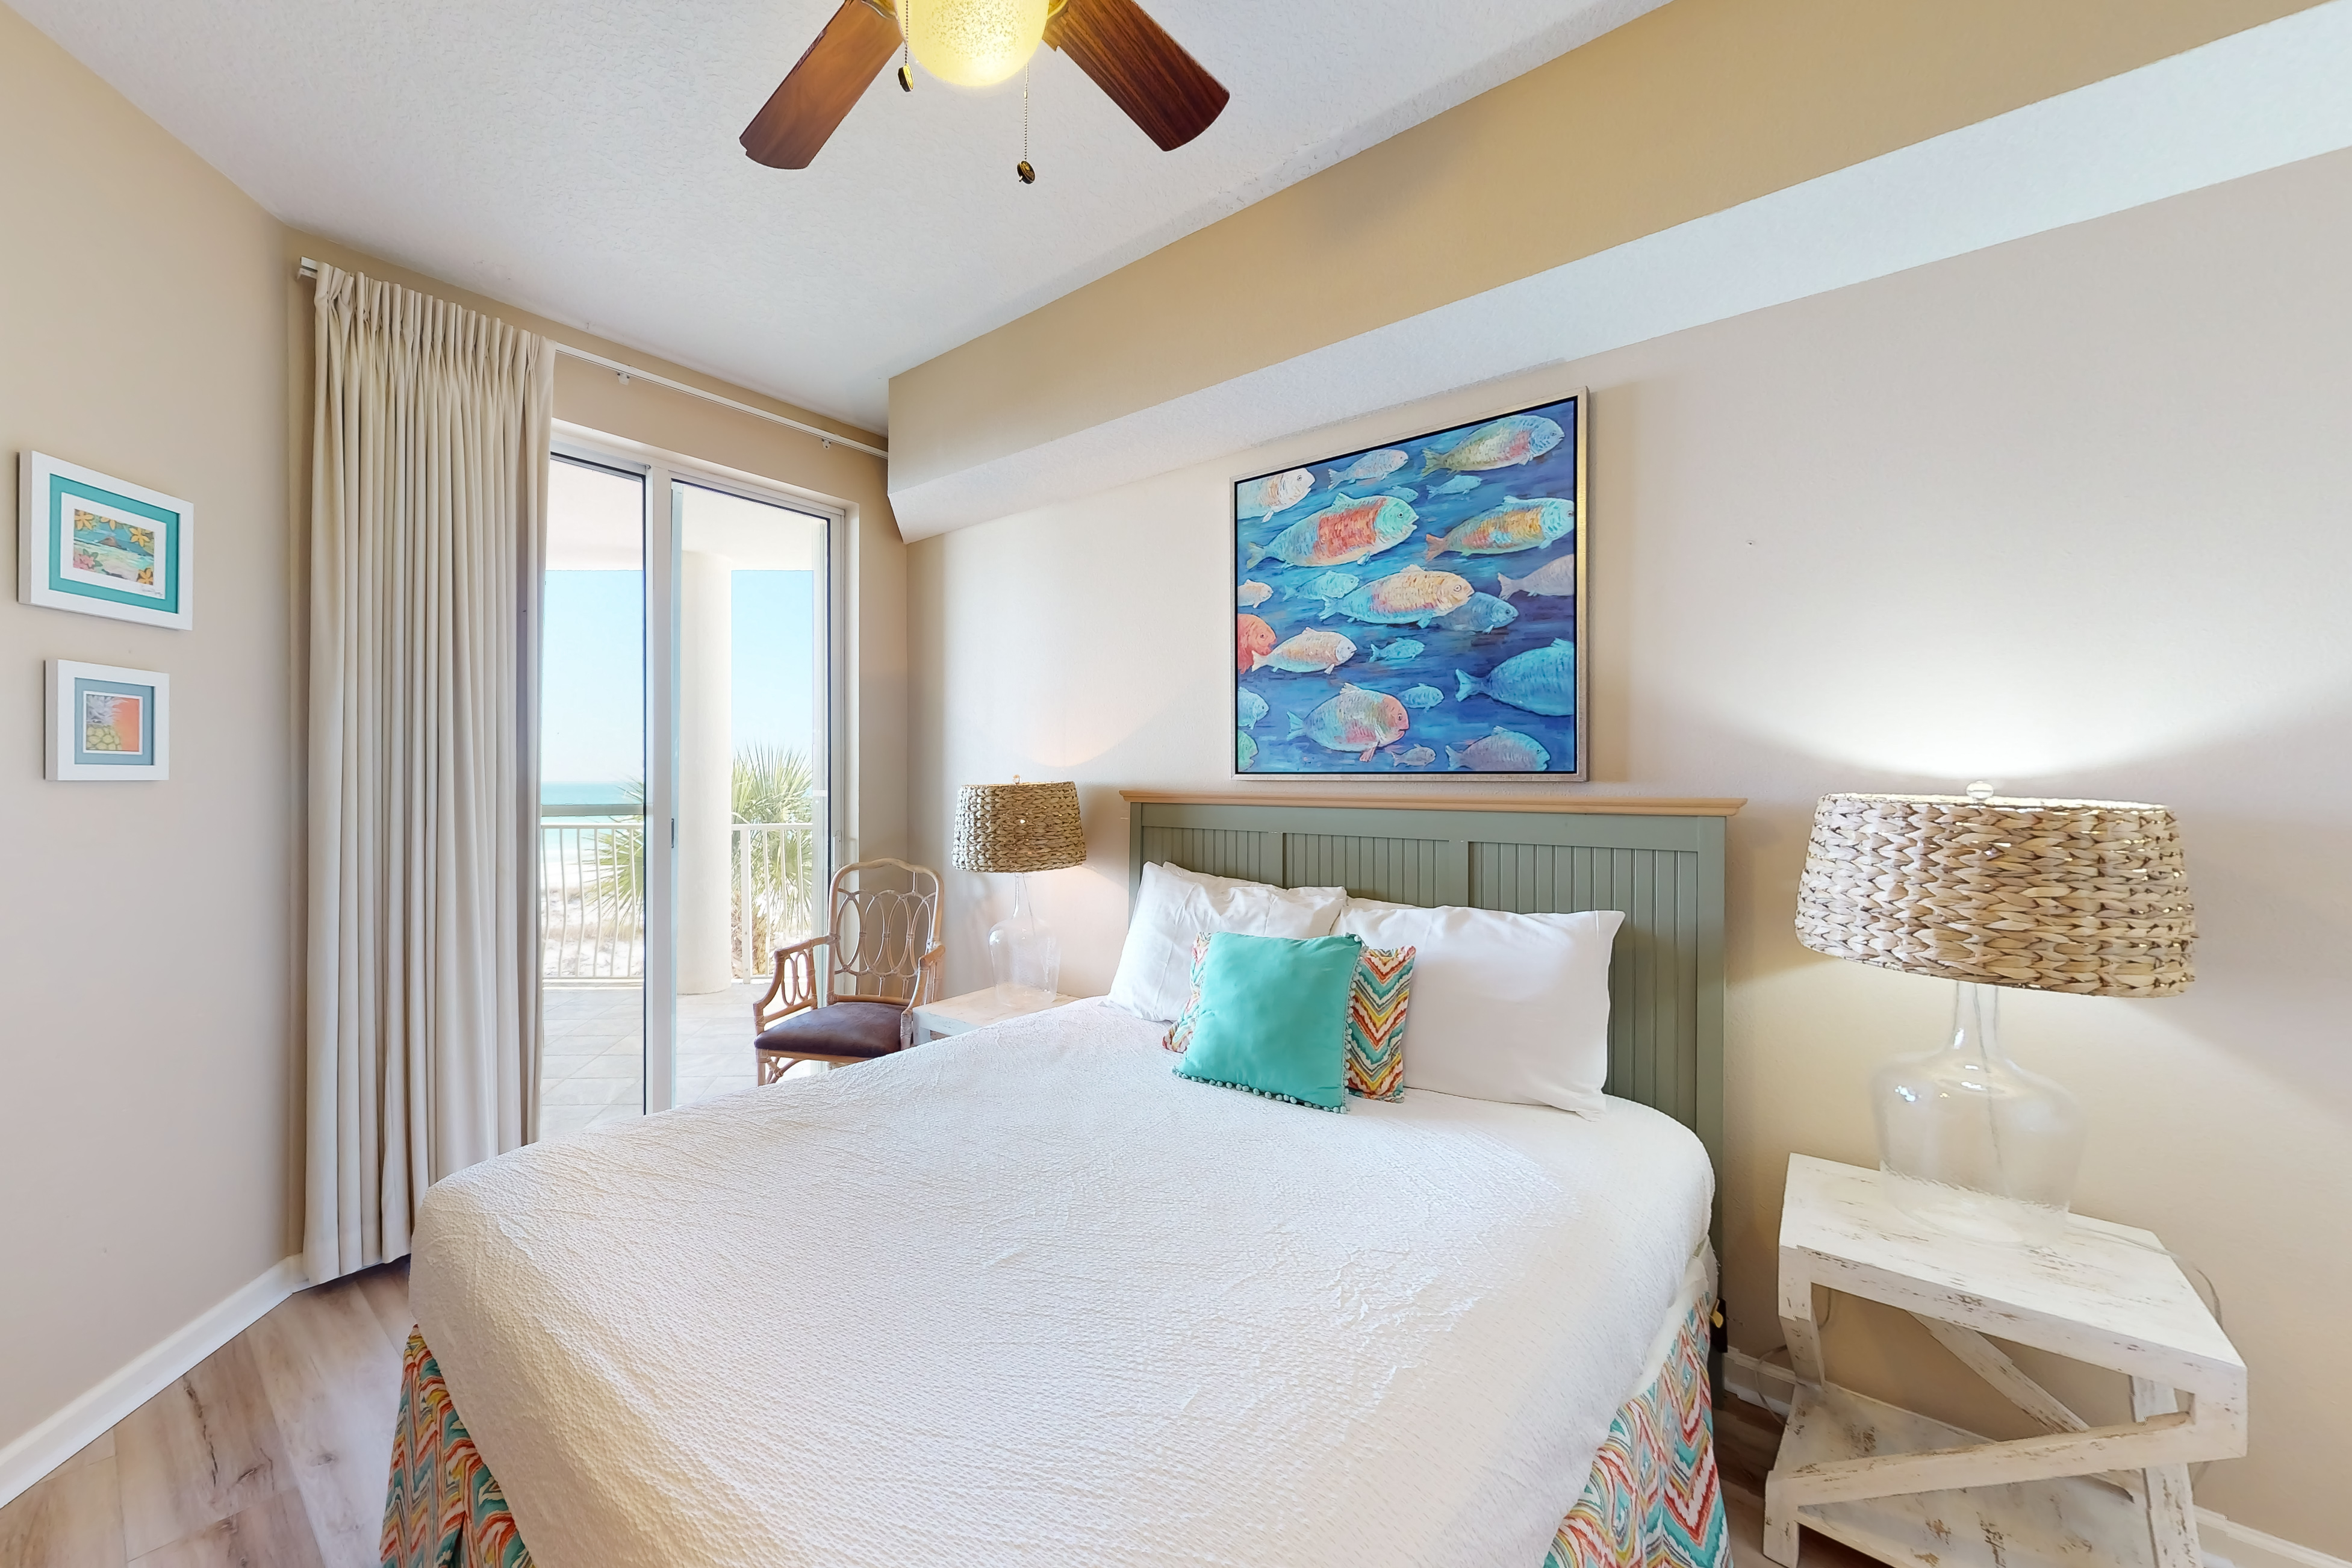 Dunes of Seagrove A209 Condo rental in Dunes of Seagrove in Highway 30-A Florida - #16